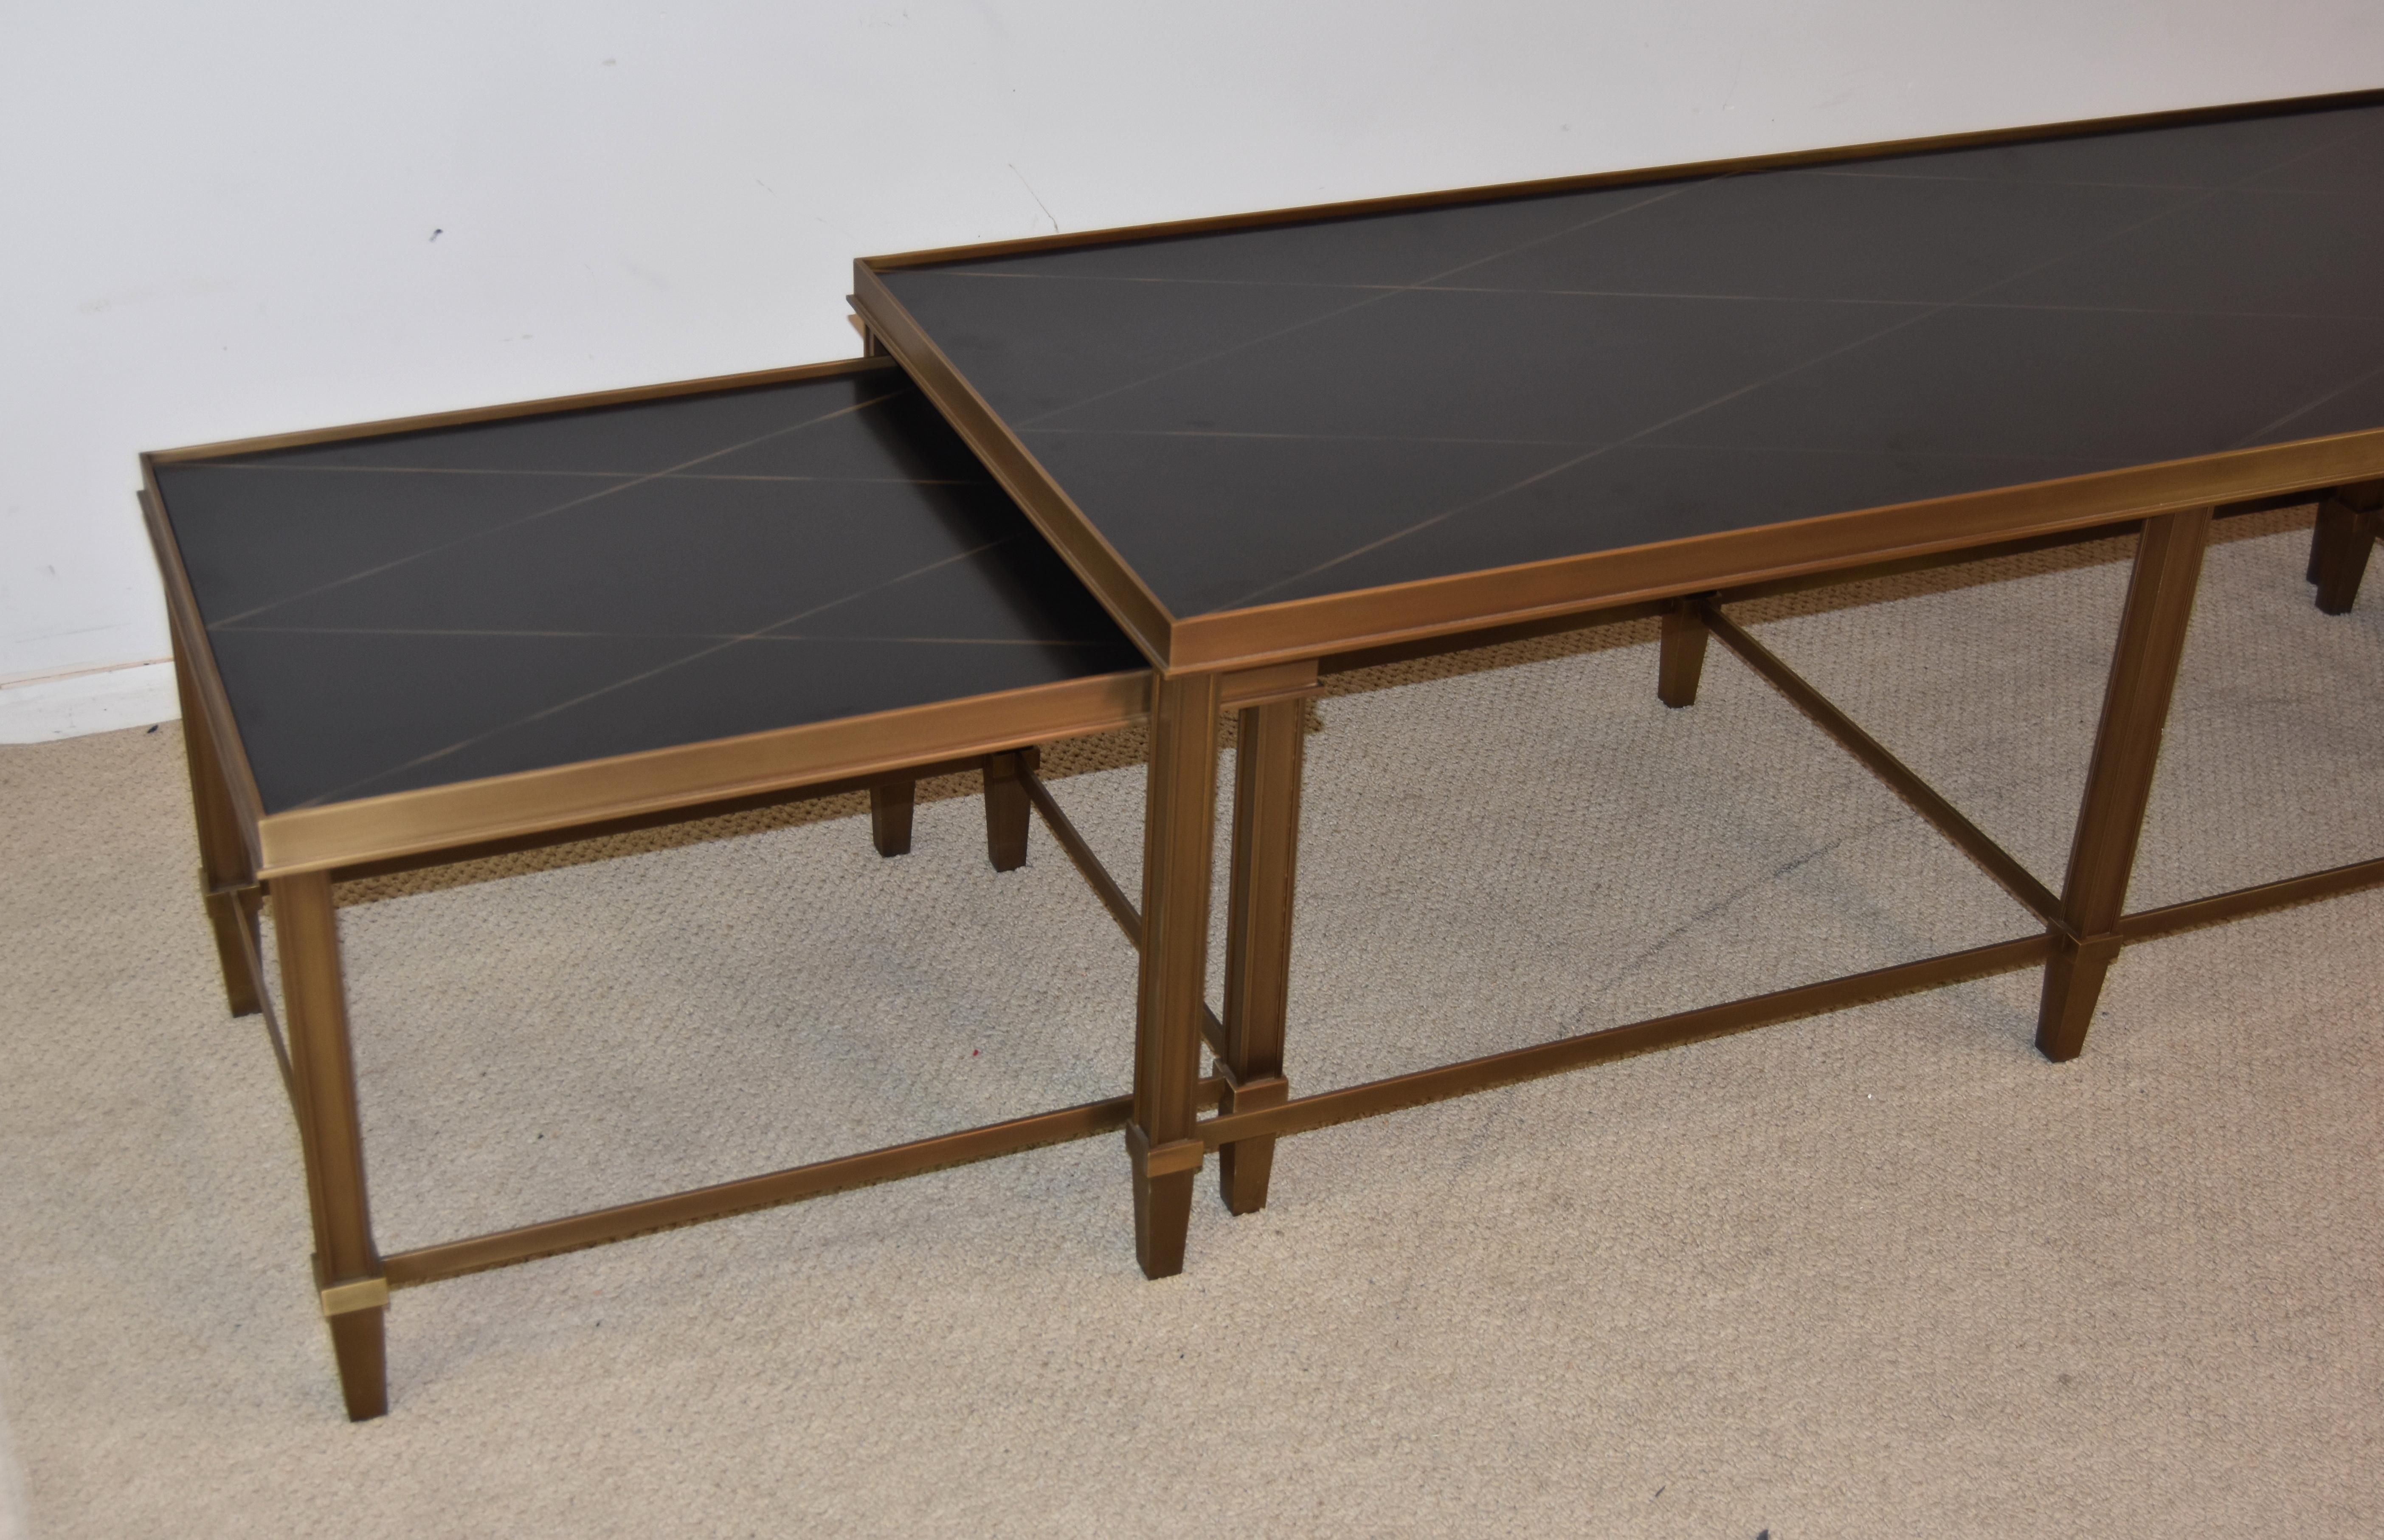 Beautiful 3 piece Baker nesting coffee table set in the Harlequin design by Bill Sofield. These pieces are in great condition. They have bronze frames and black lacquered wood tops. The tops display a gold detail work in a Harlequin design. The 2